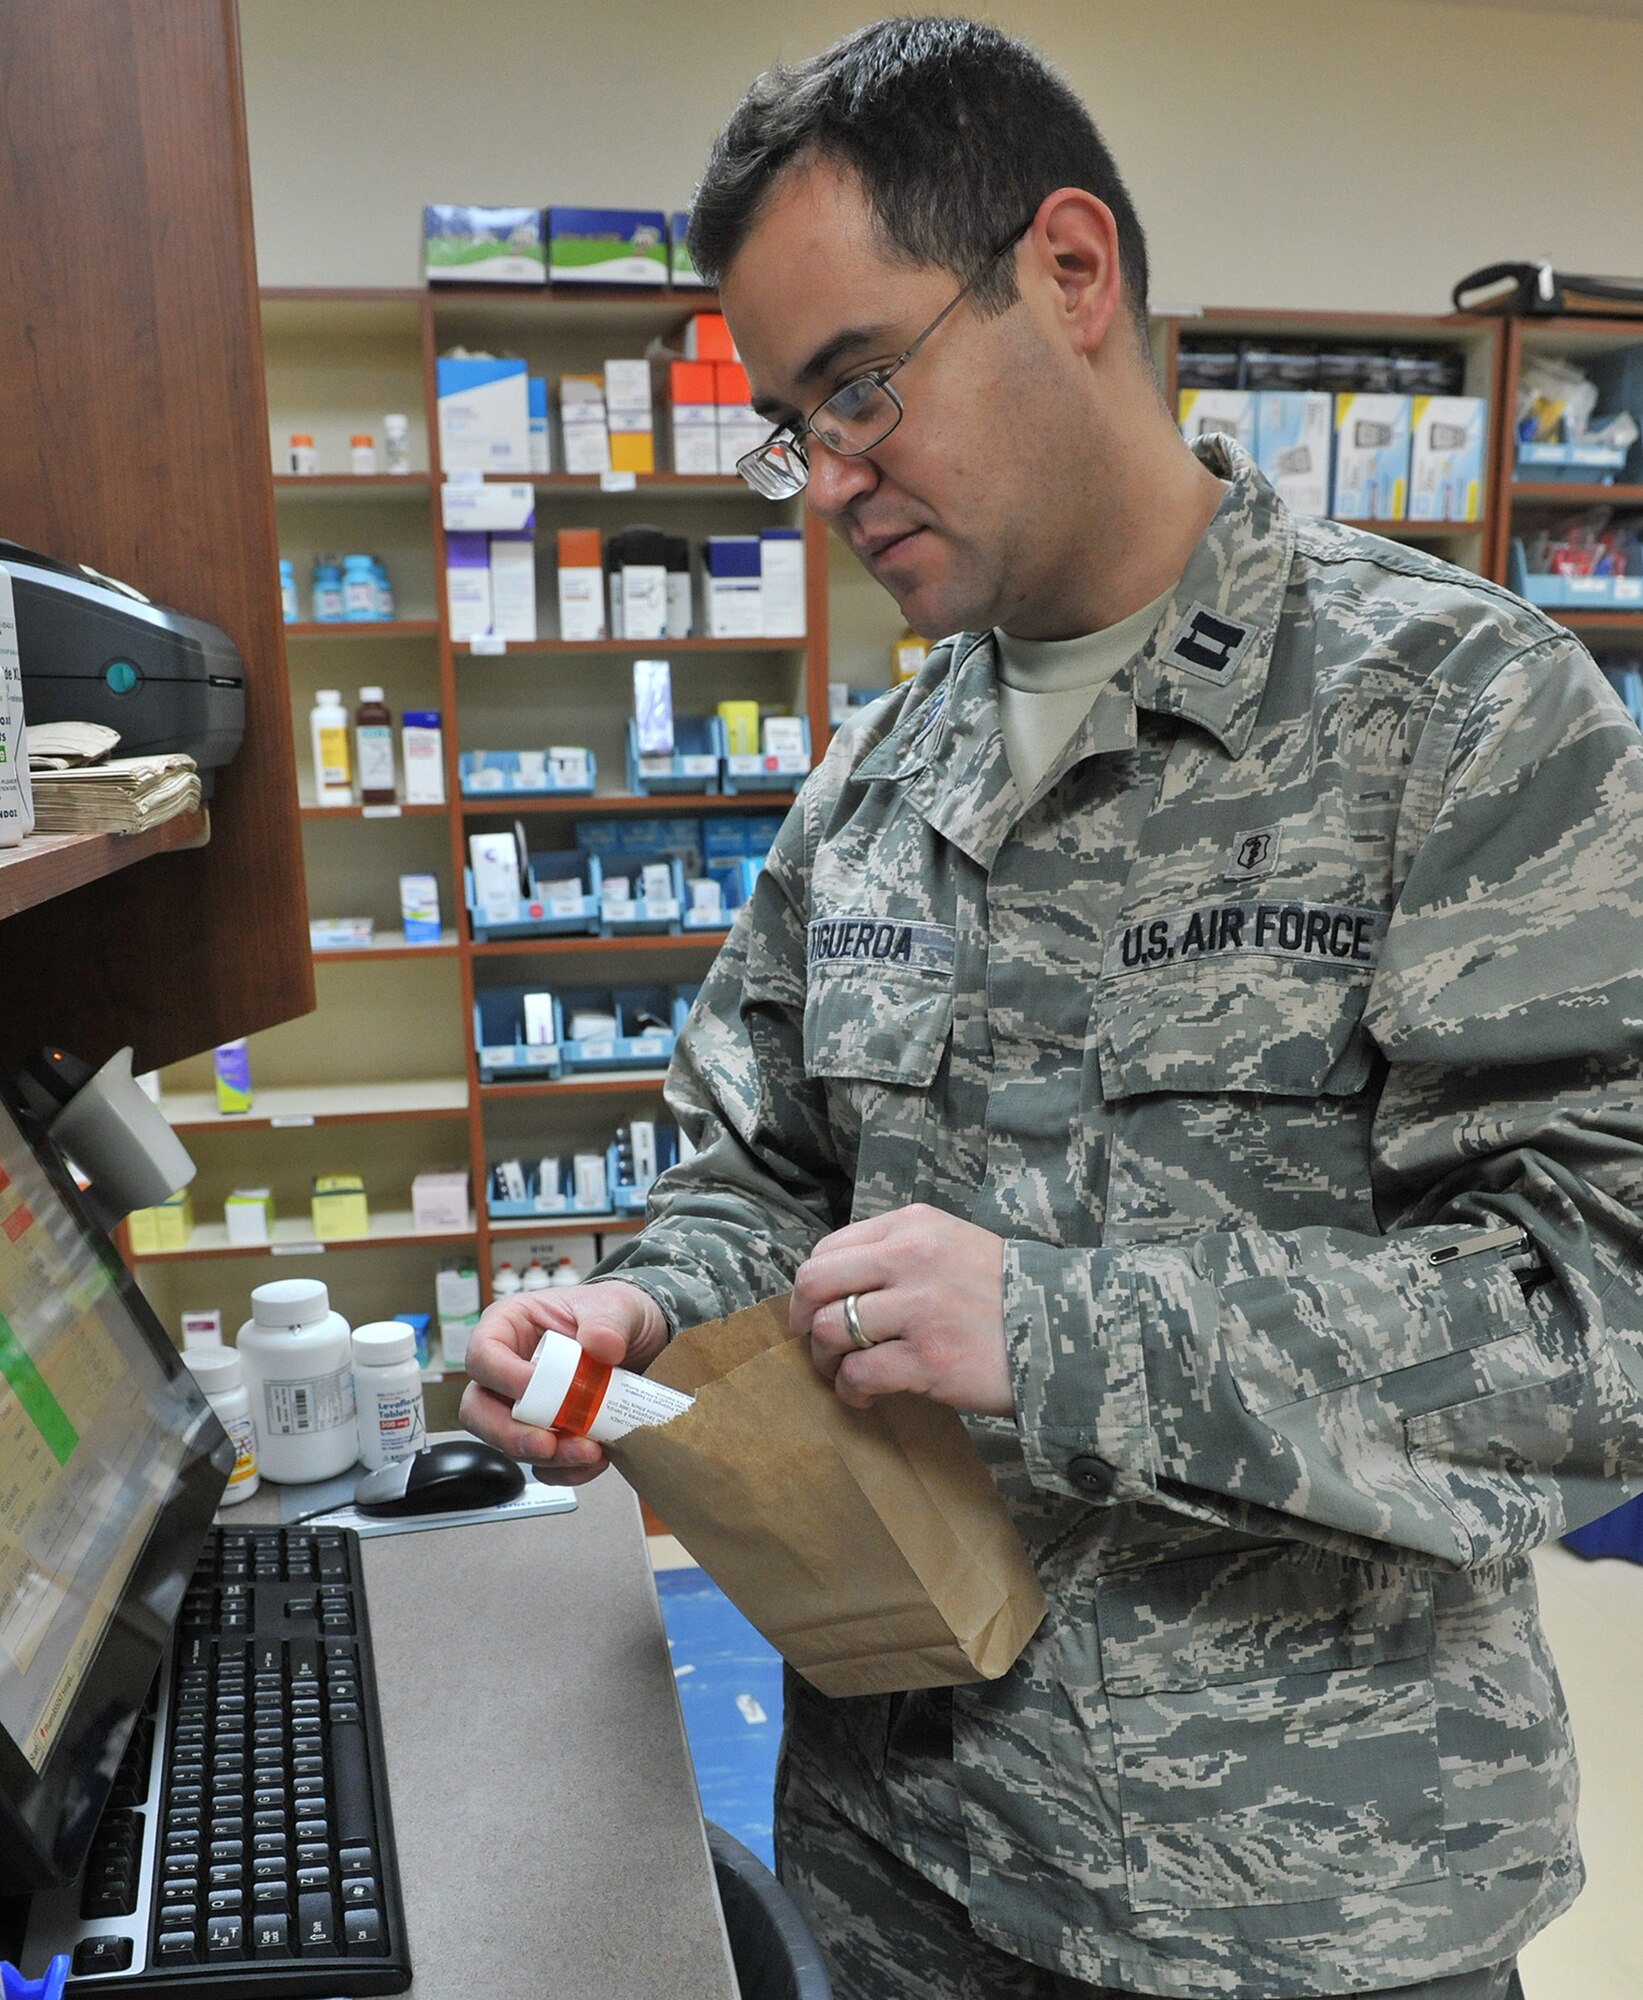 Capt. Arnaldo Figueroa, 341st Medical Support Squadron pharmacy flight commander, verifies prescription refills Jan. 27 at Malmstrom Air Force Base, Mont. As one of Malmstrom’s two pharmacists, Figueroa also manages anti-coagulation therapy for patients and administers the tobacco cessation medications for the 341st Medical Group’s tobacco cessation program. (U.S. Air Force photo/John Turner)